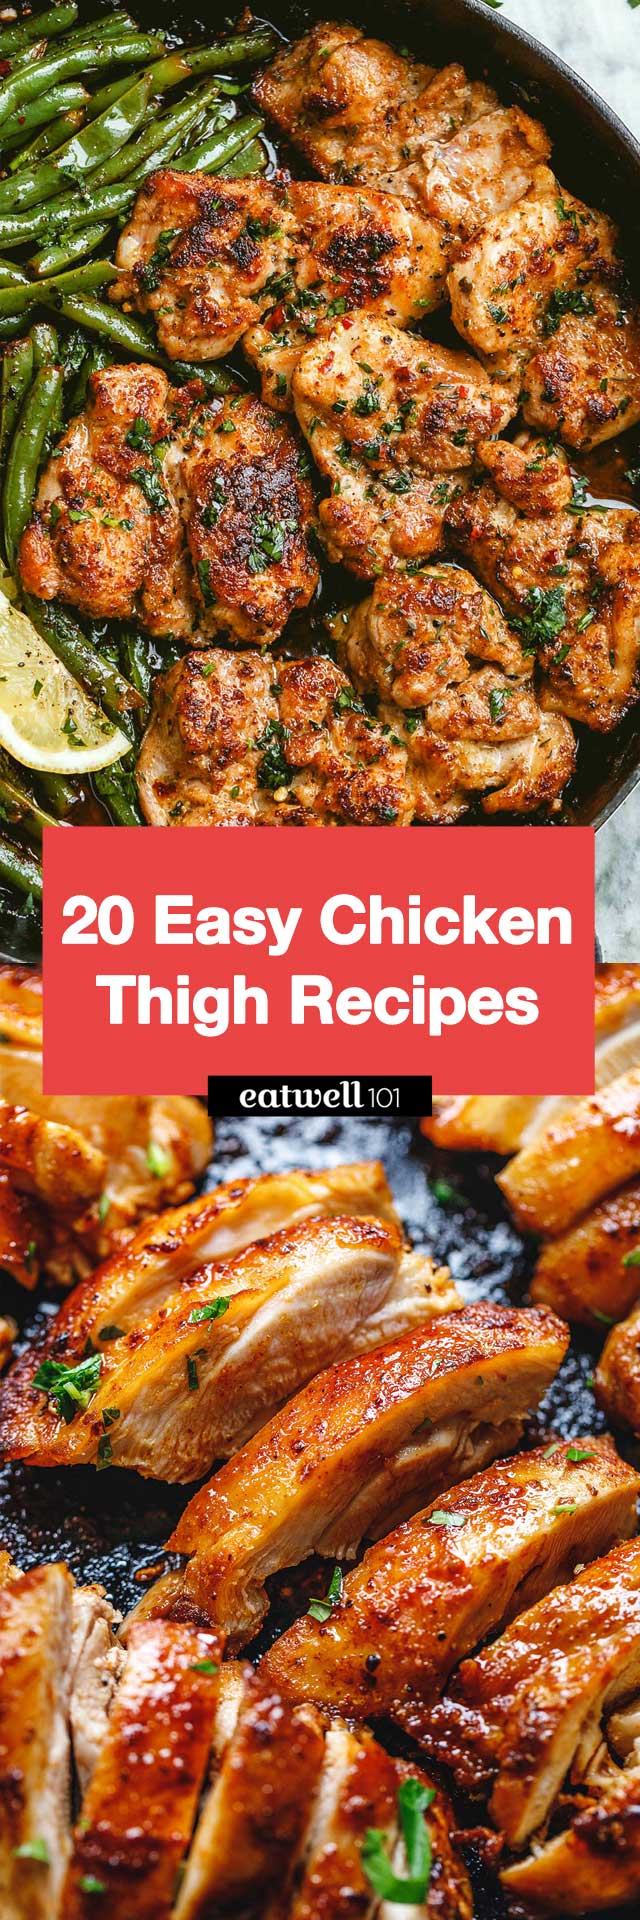 14 Easy Chicken Thighs Recipes That Are Quick to Fix - #chicken #recipes #eatwell101 - Quick and easy, these chicken thighs recipes will be on the table in half an hour or less.